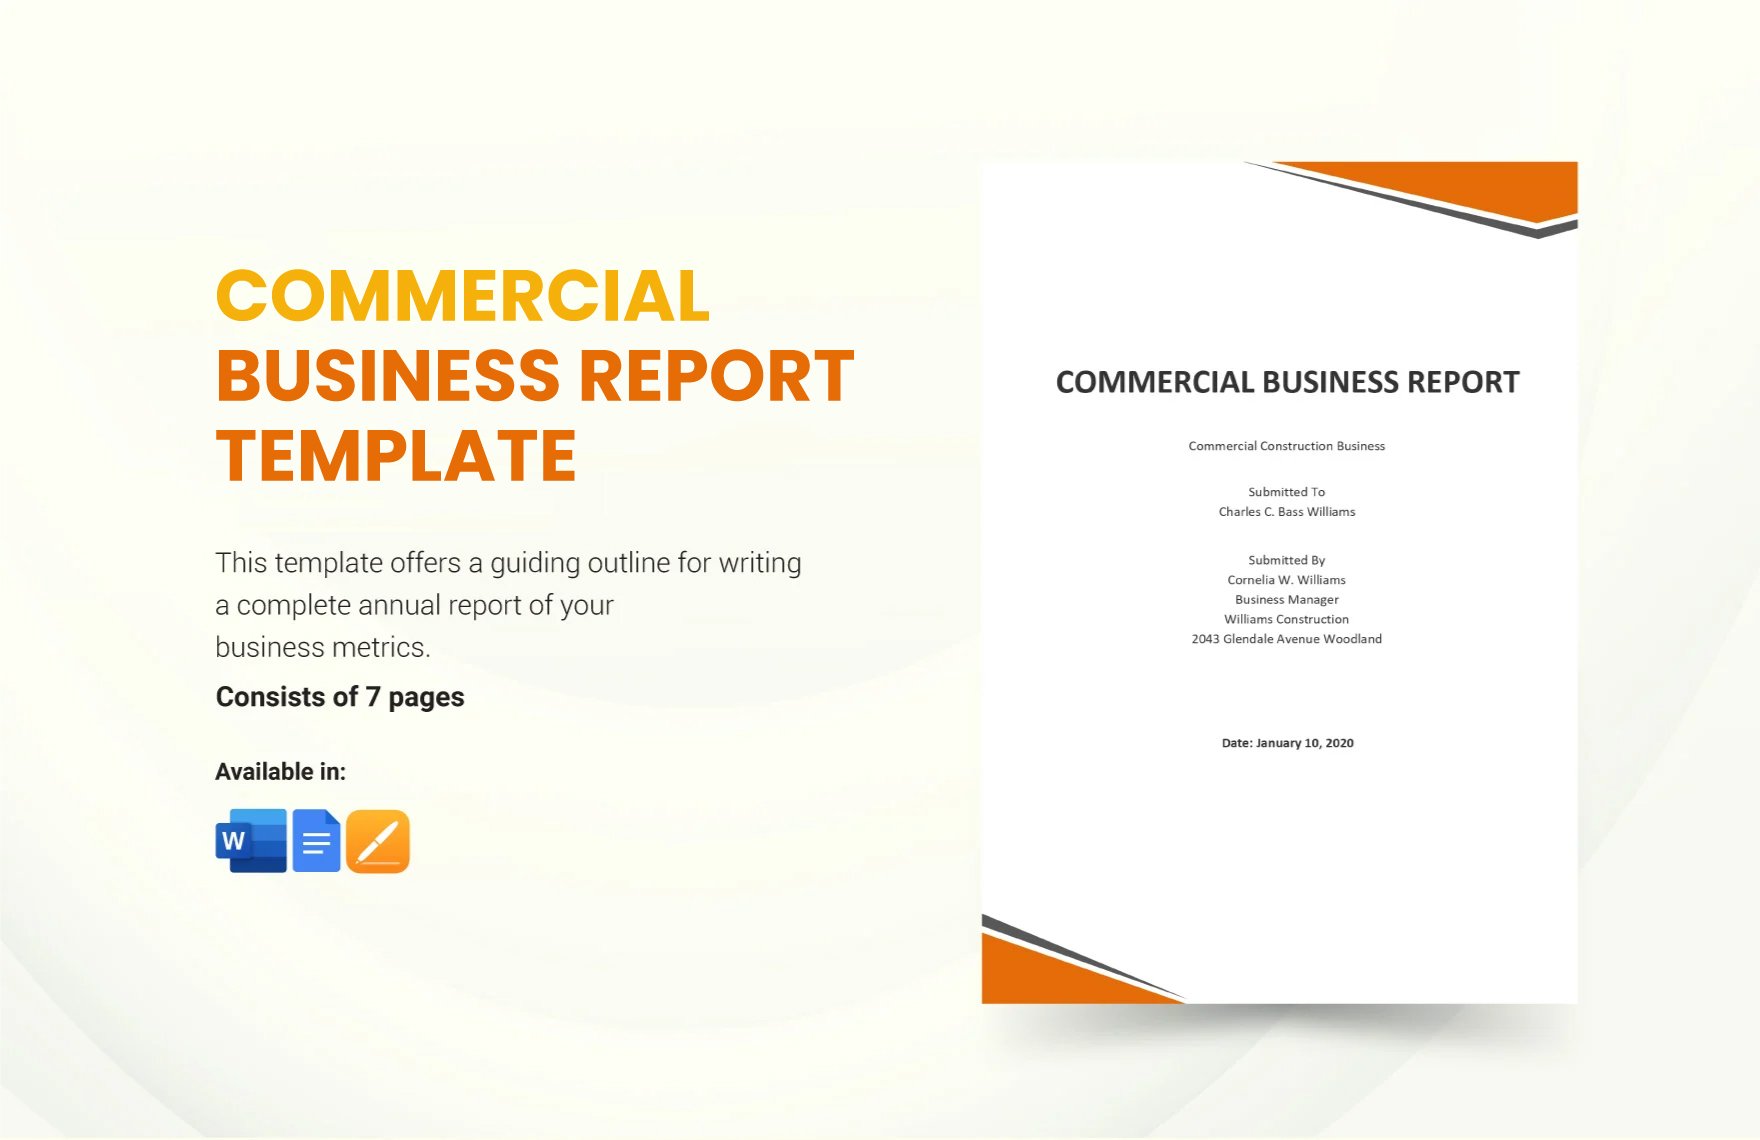 Free Commercial Business Report Template in Word, Google Docs, Apple Pages